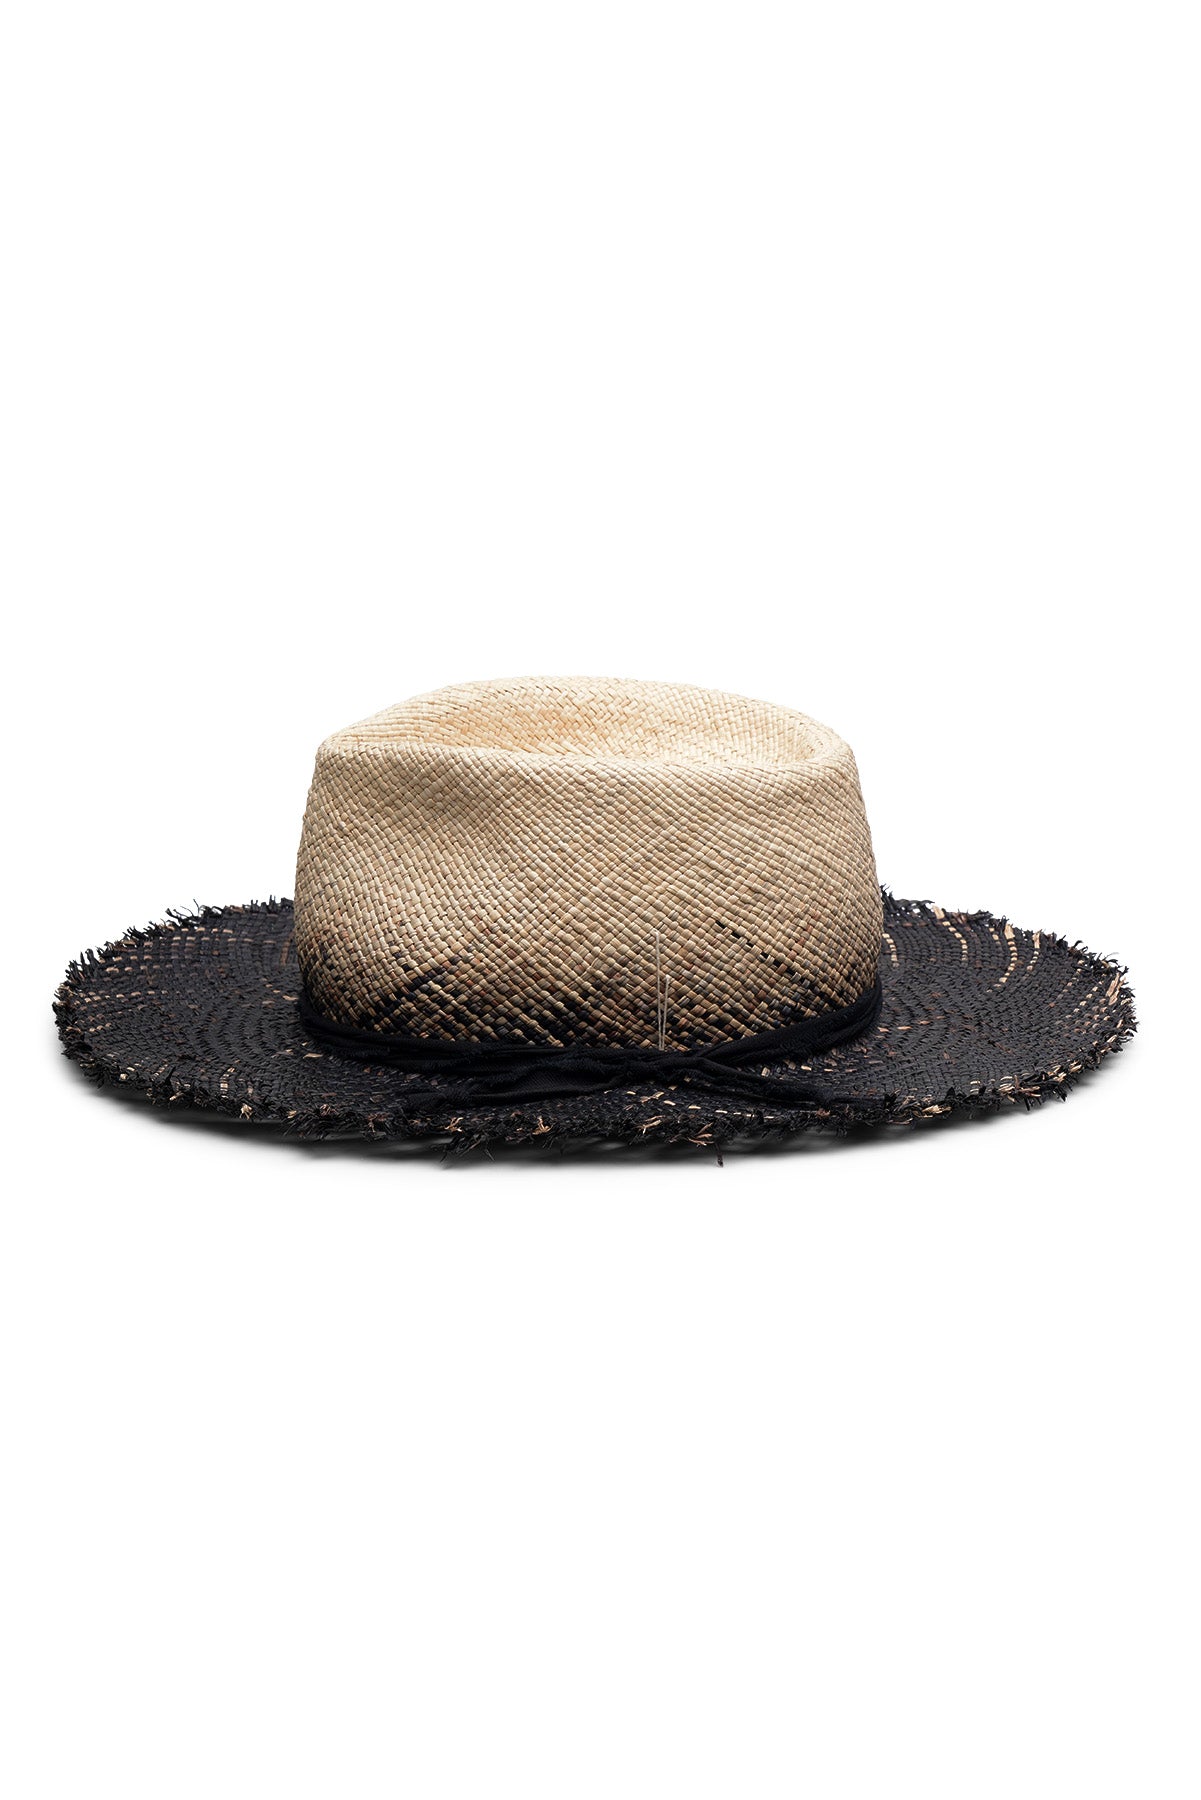 Black and natural gradient straw fedora style hat with a wide brim, frayed edges and teardrop crease. Tied cotton band with seashell detail. Unisex hat style in various sizes and colors. We ship worldwide. Shop now. Each SoonNoon hat is handmade with unique character in Stockholm, Sweden. 